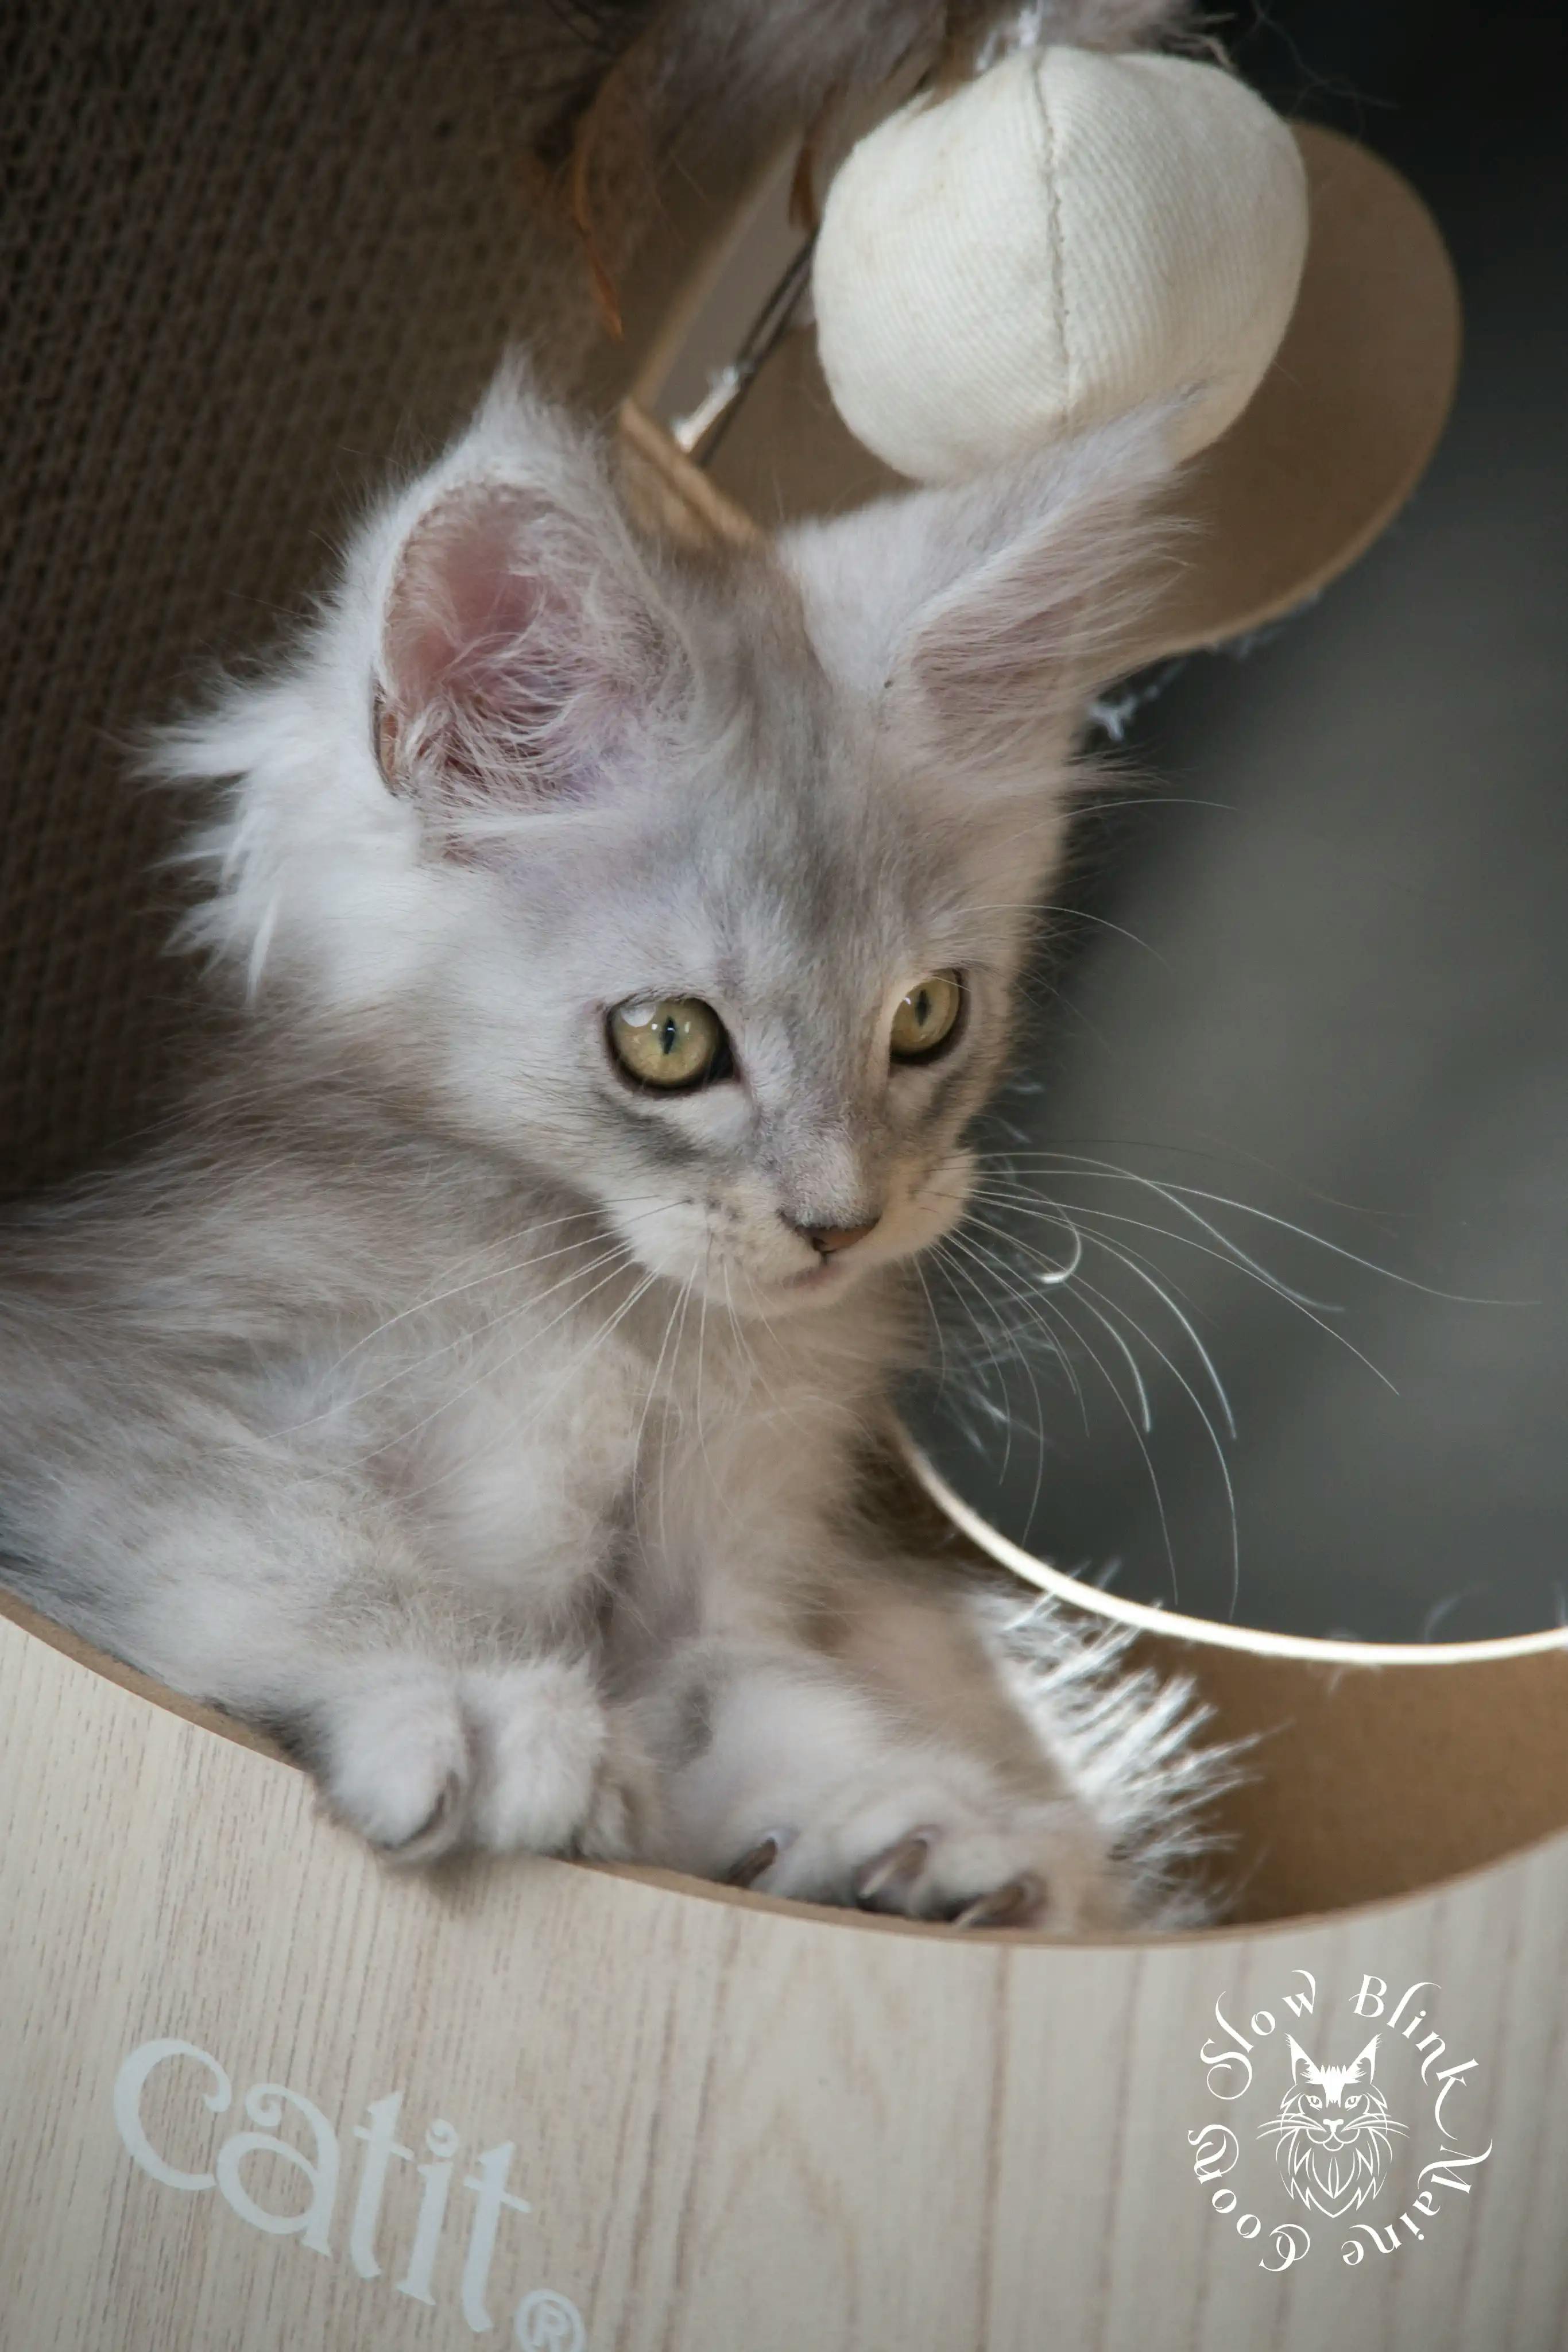 High Silver Maine Coon Kittens > black silver tabby maine coon kitten | ems code ns 22 23 24 25 | slowblinkmainecoons | 588